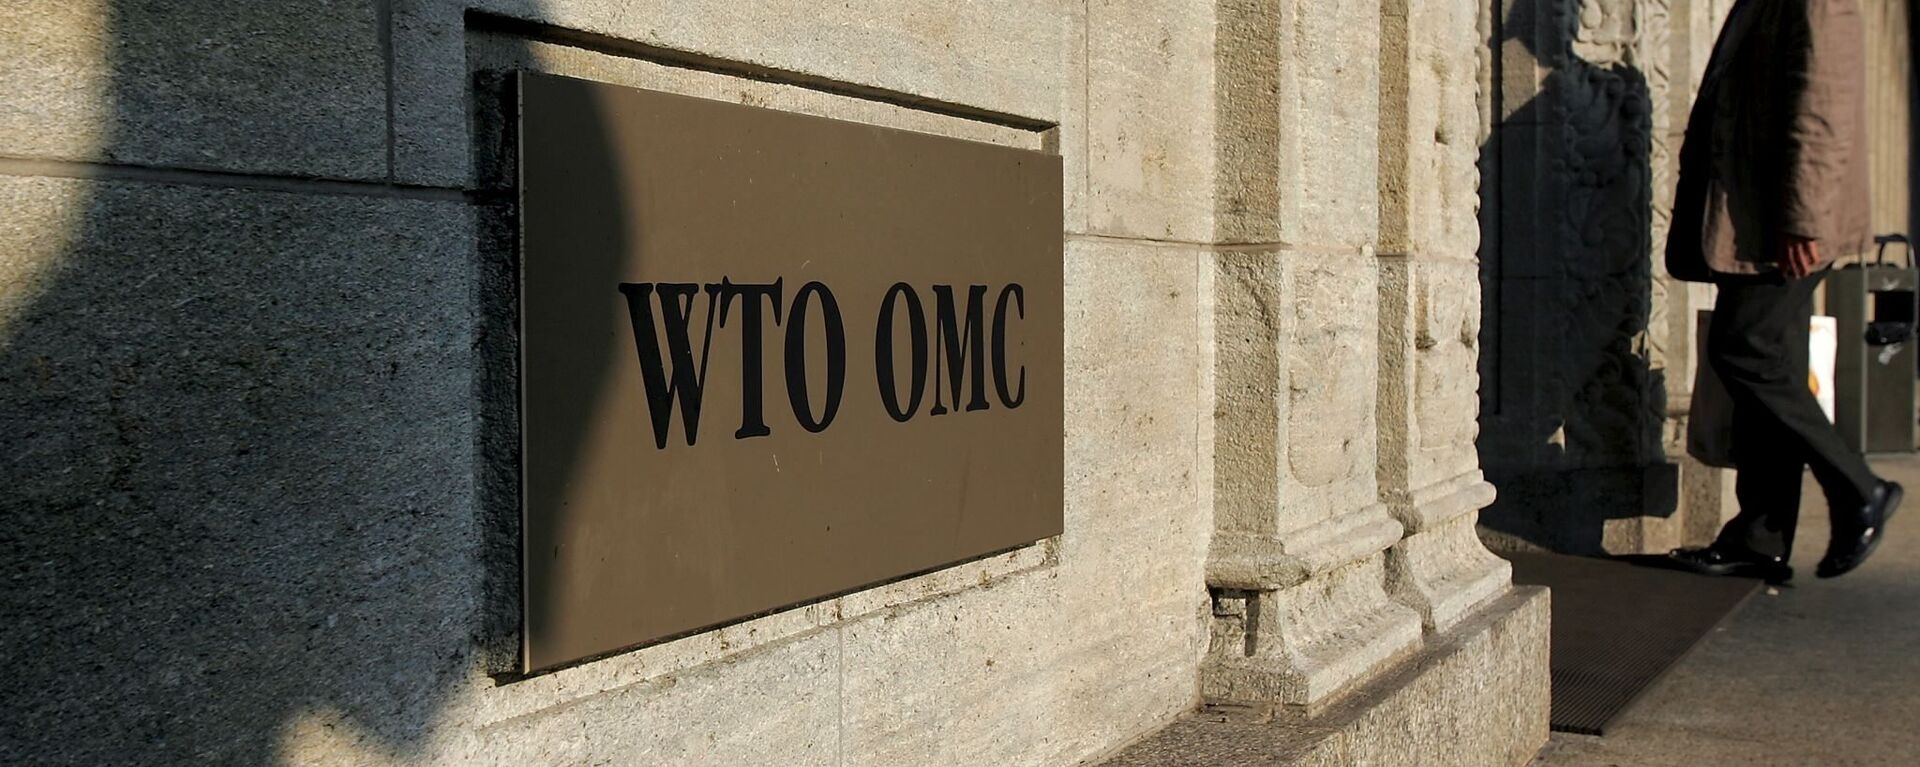 The shadow of a sculpture is reflected on the World Trade Organisation, WTO sign near the entrance of the headquarters, in Geneva (File) - Sputnik International, 1920, 30.09.2020